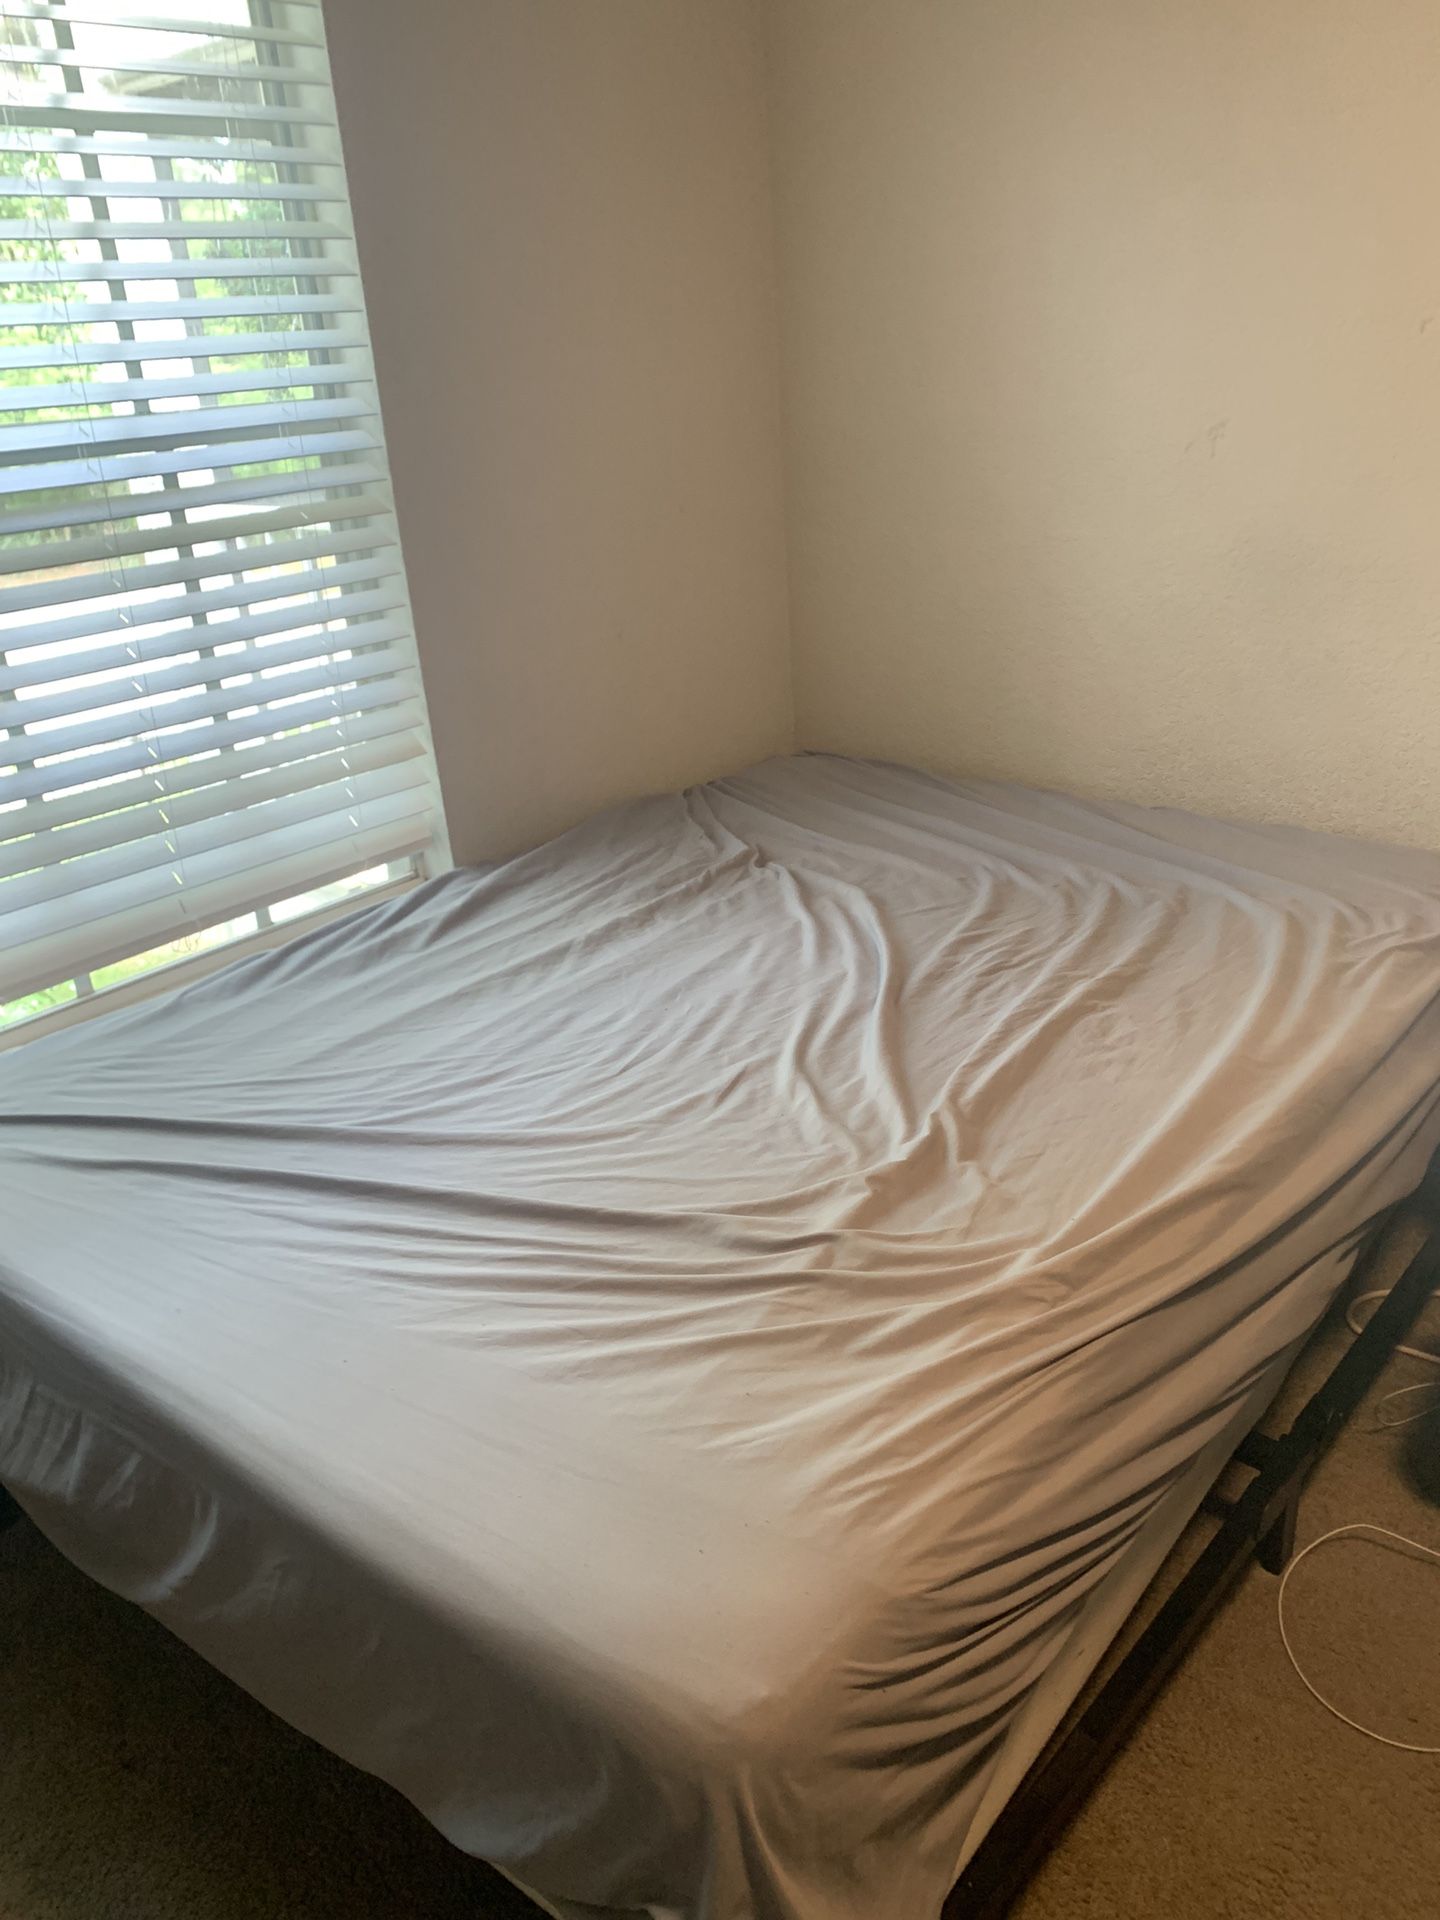 Full size mattress (bed frame and box spring included)